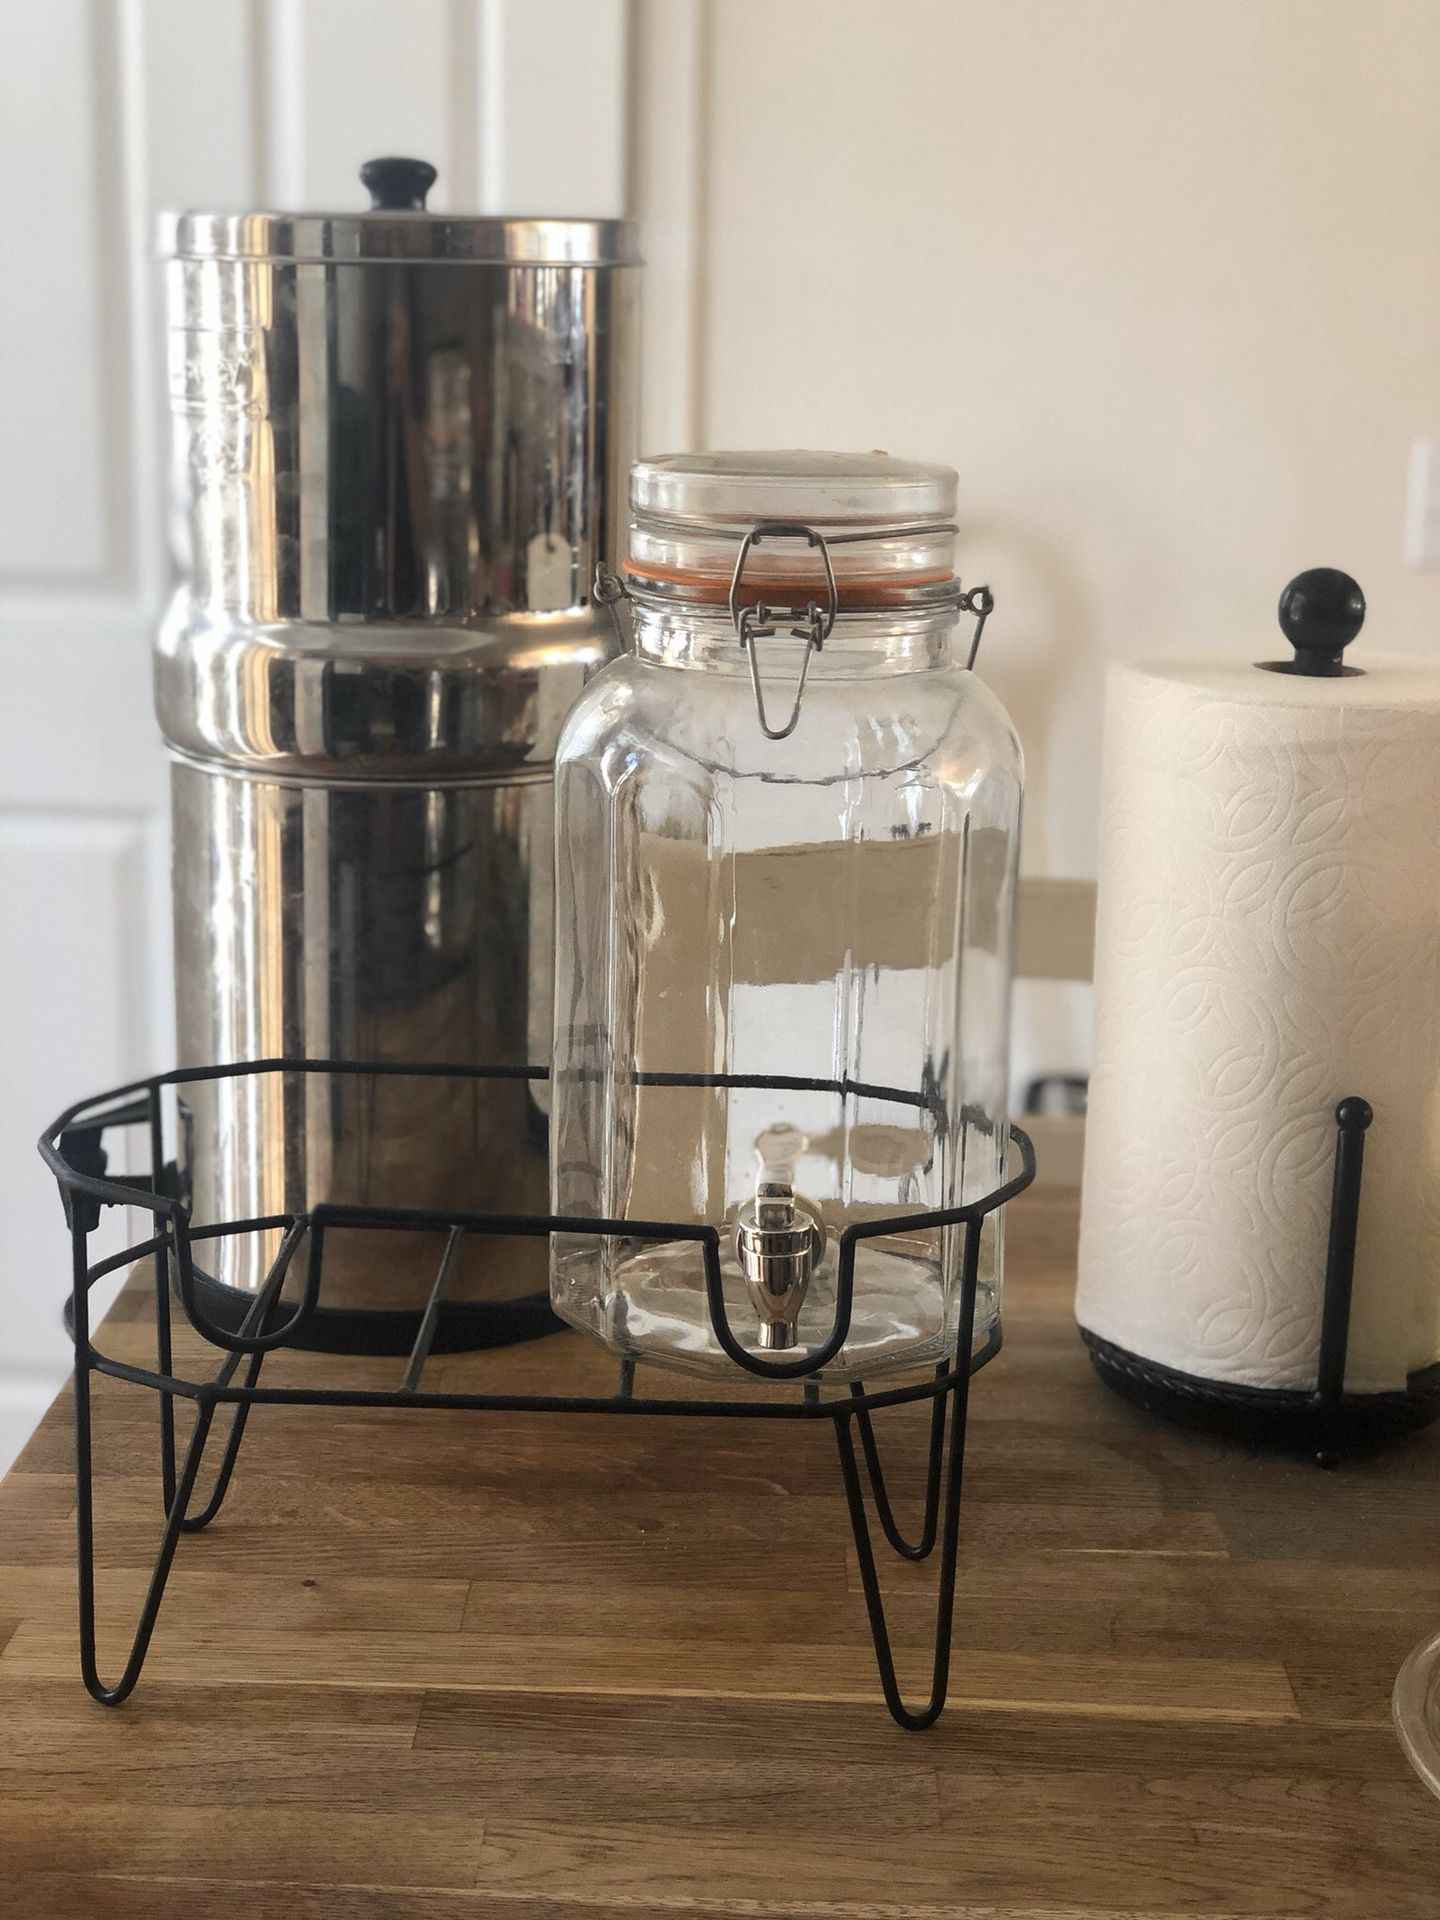 One glass beverage dispenser and stand